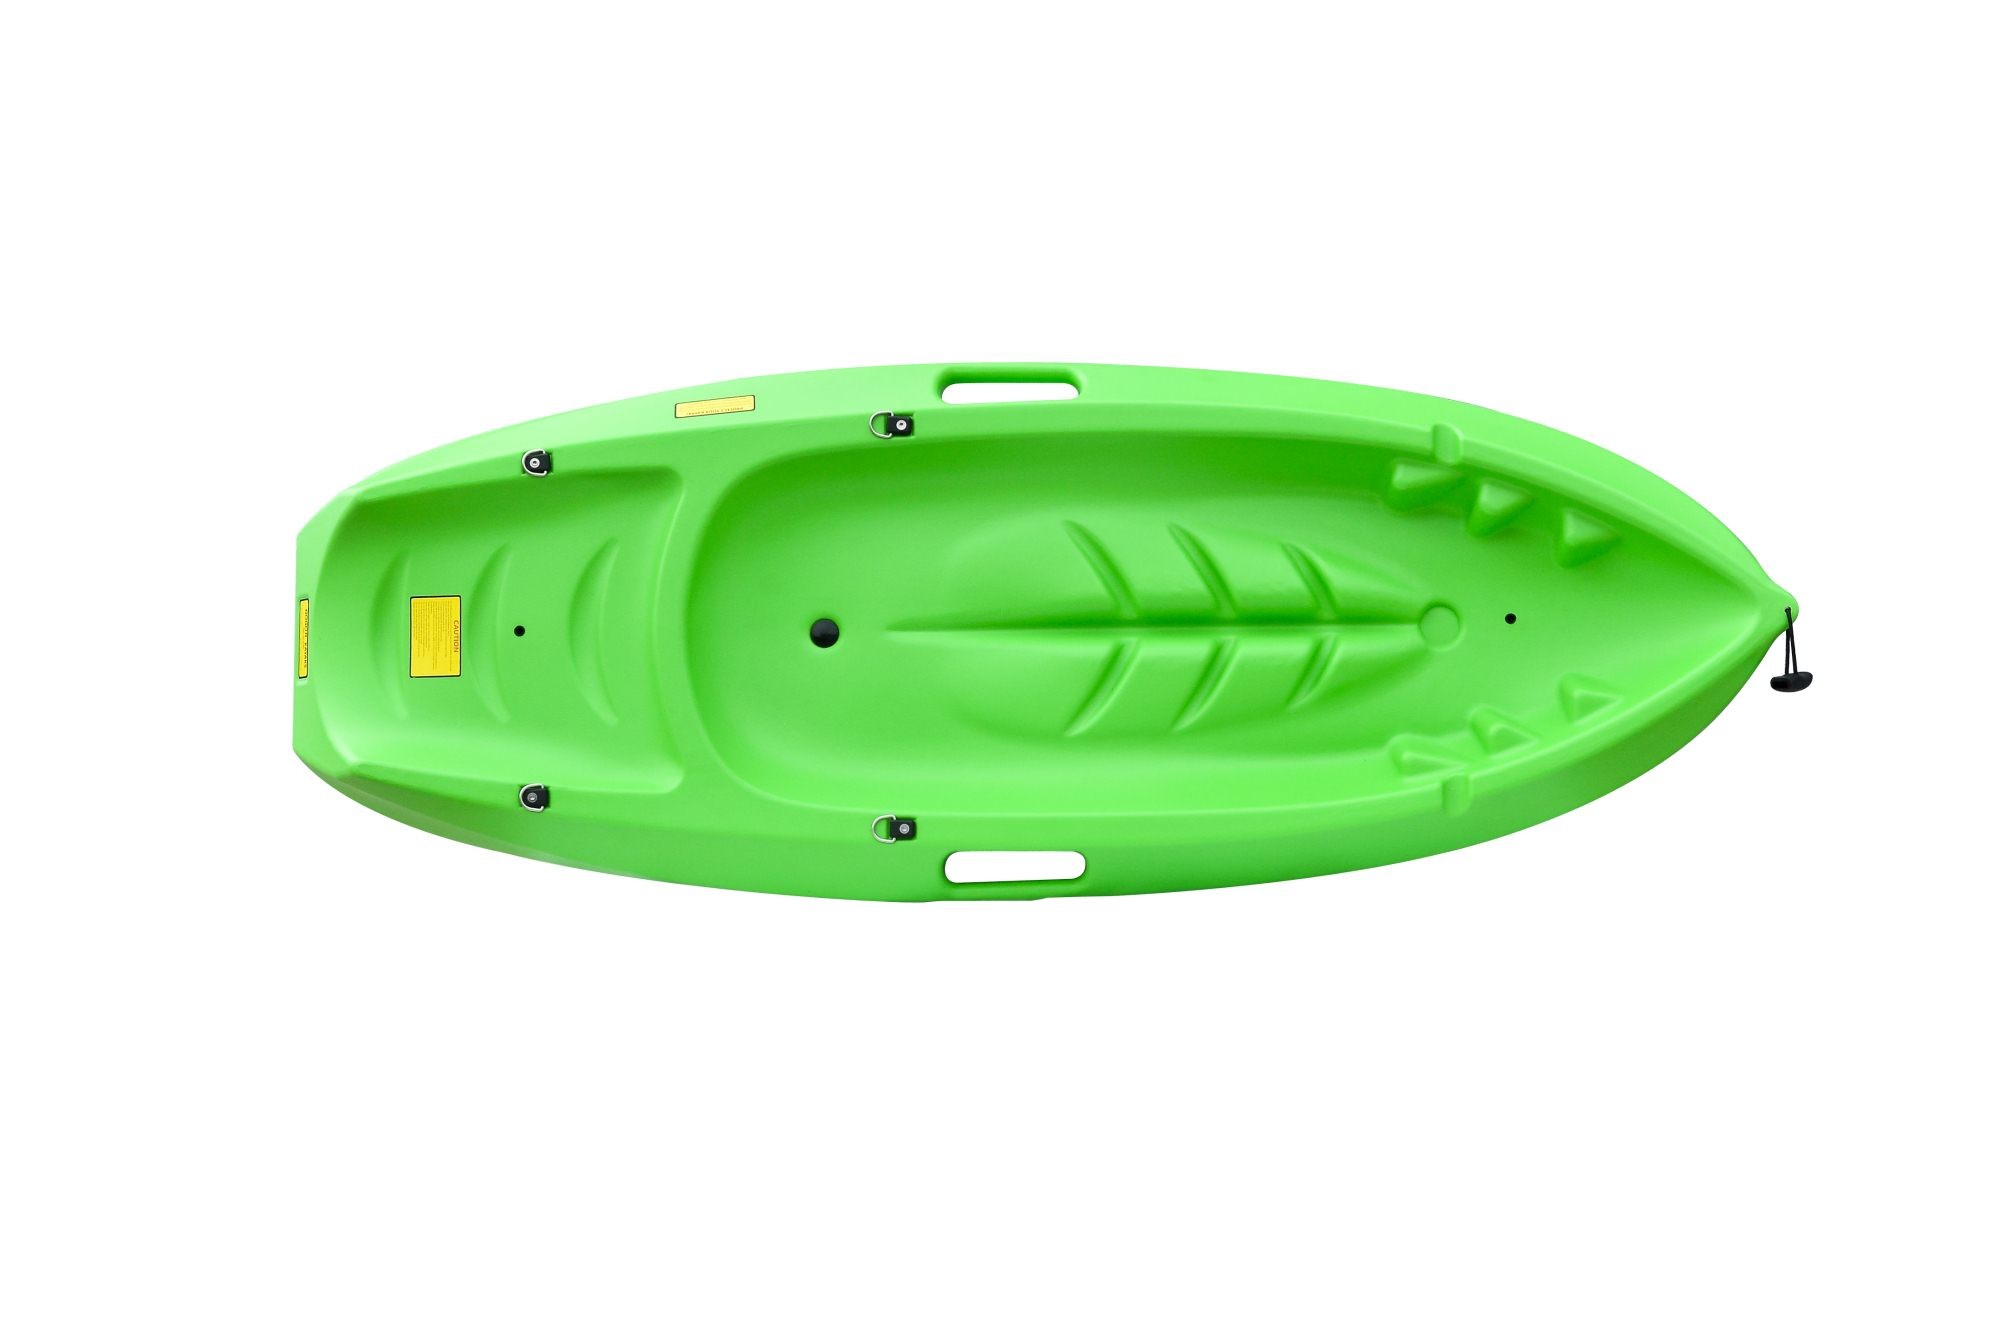 Best No Inflatable 6ft Kids Sit On Top Kayak Easy Control For Kids Beginner Eco - Frienldy With Side Handles wholesale